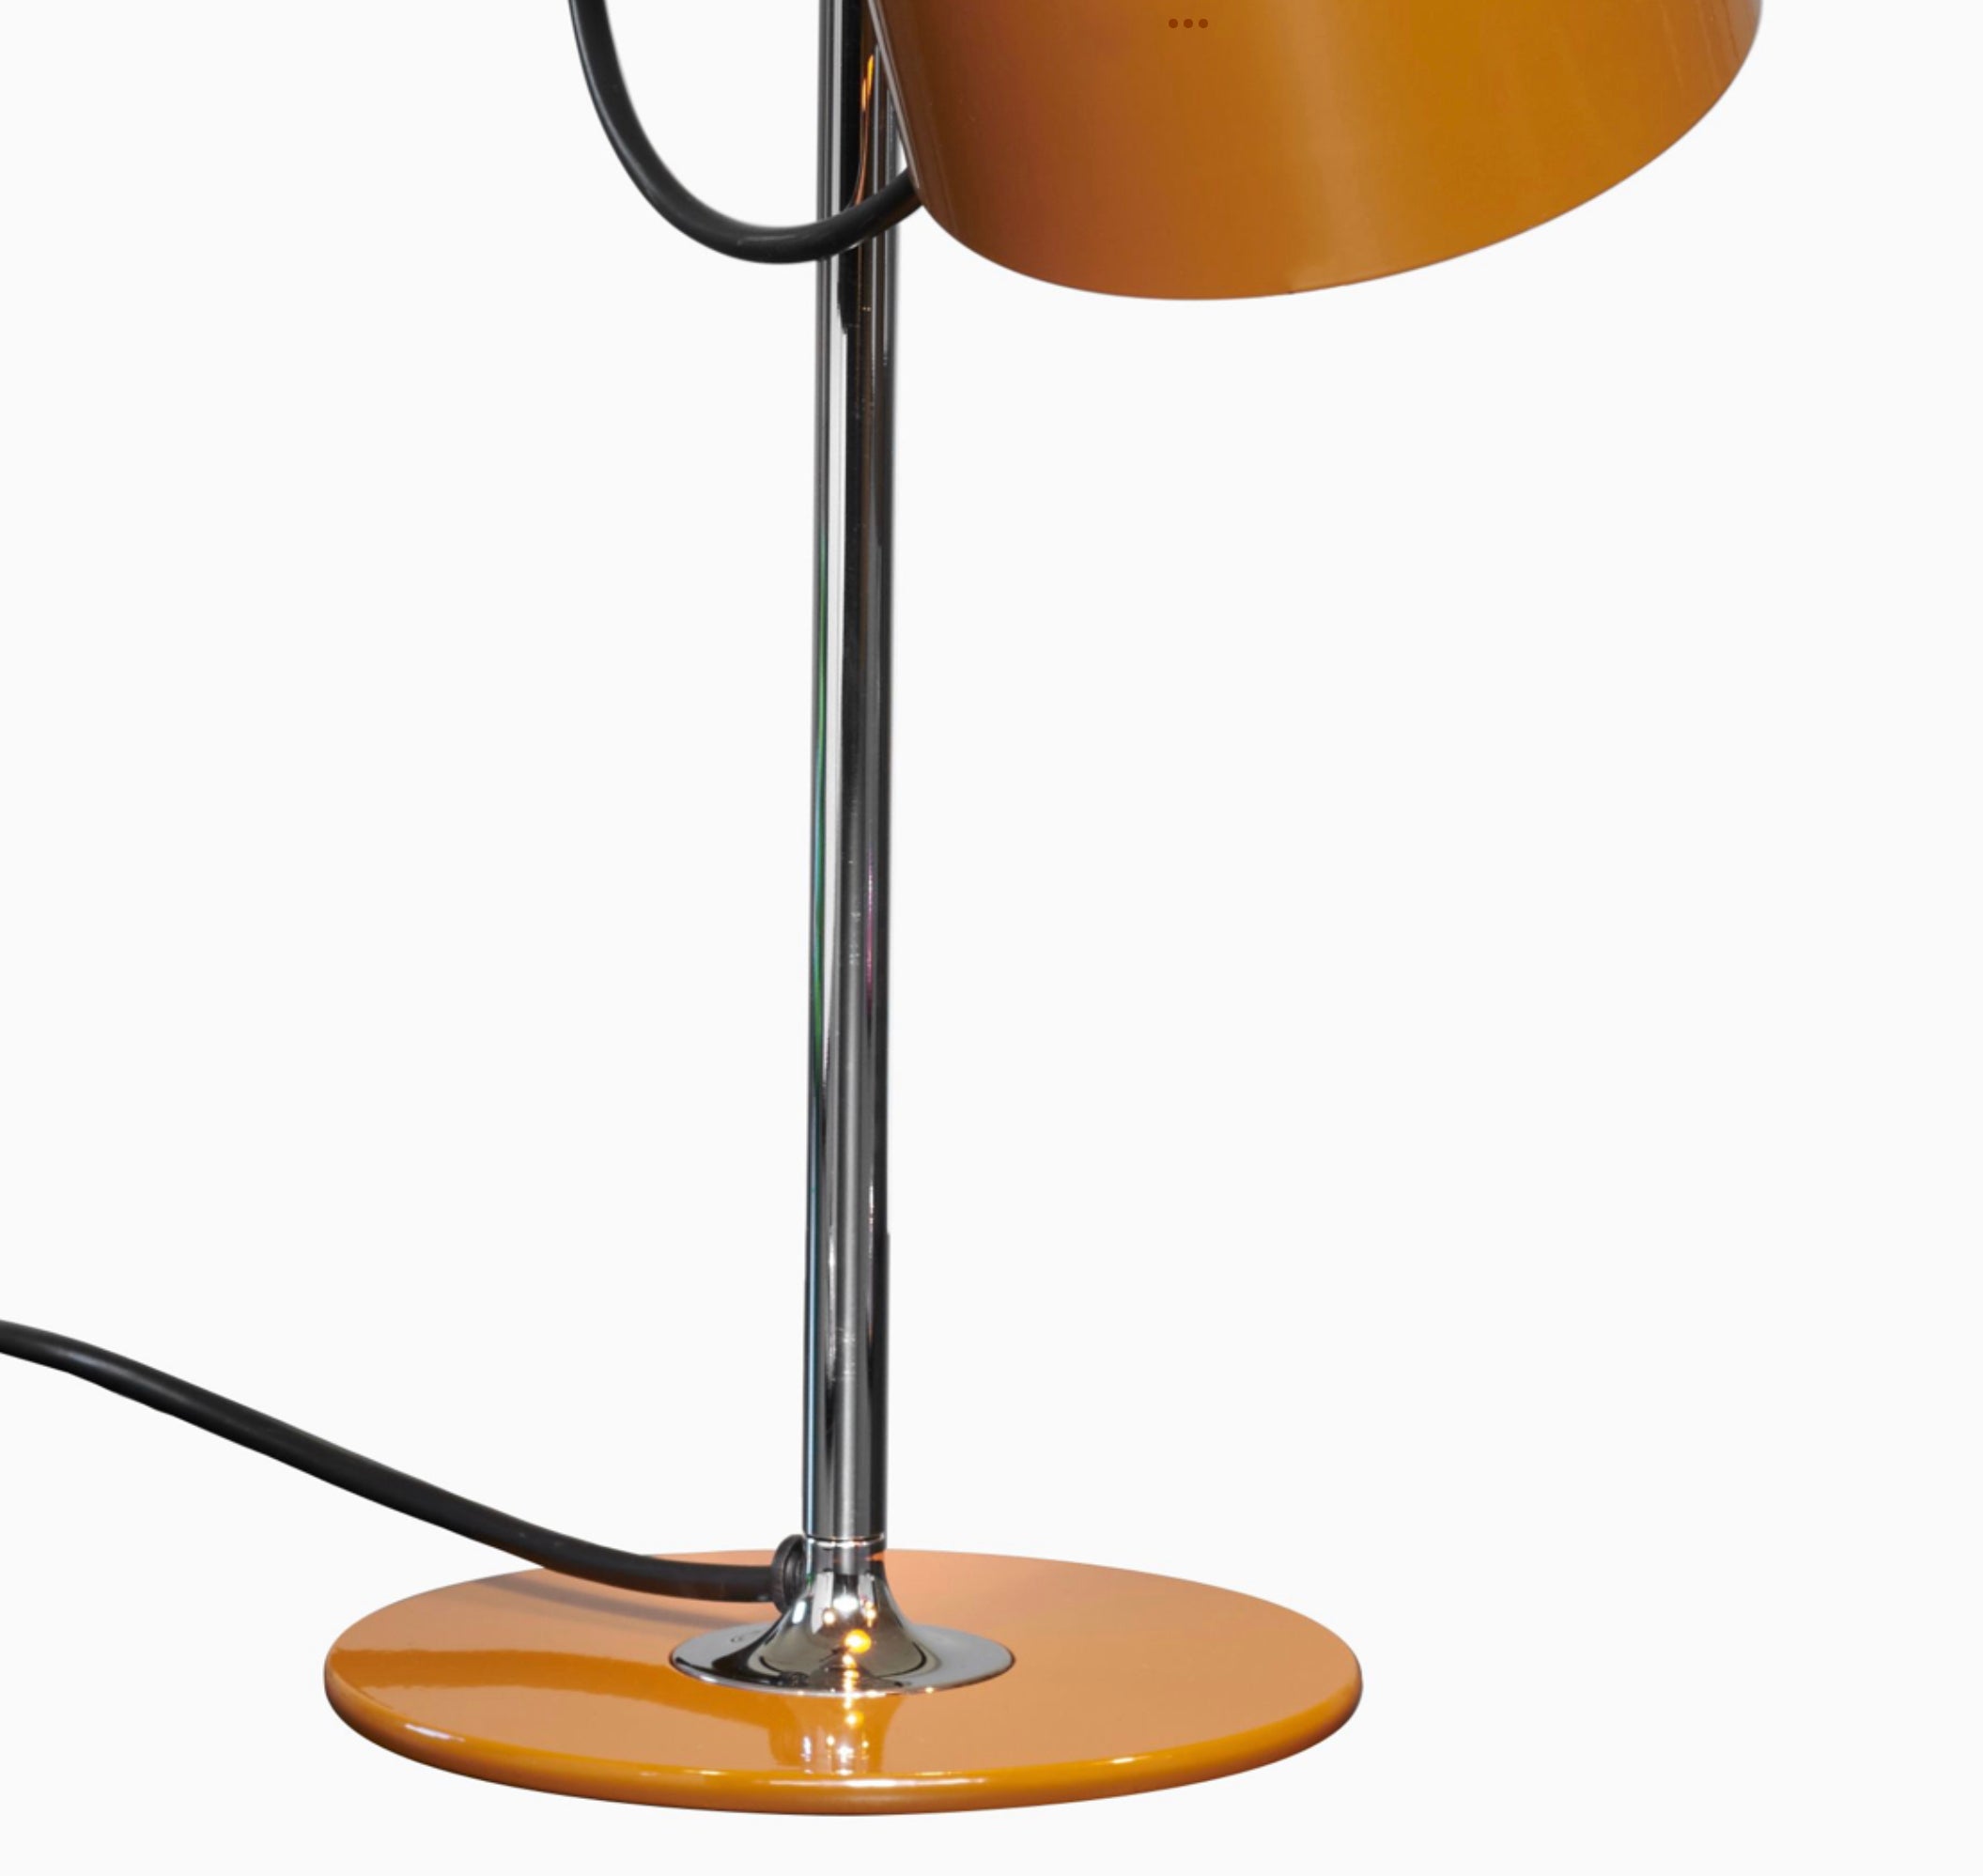 Table Lamp model Mini Coupe designed by Joe Colombo.
Table lamp giving direct light, lacquered metal base, chromium-plated stem, adjustable reflector in lacquered aluminium.
Manufactured by Oluce, Italy.

Coupé originated in 1967 from the creative